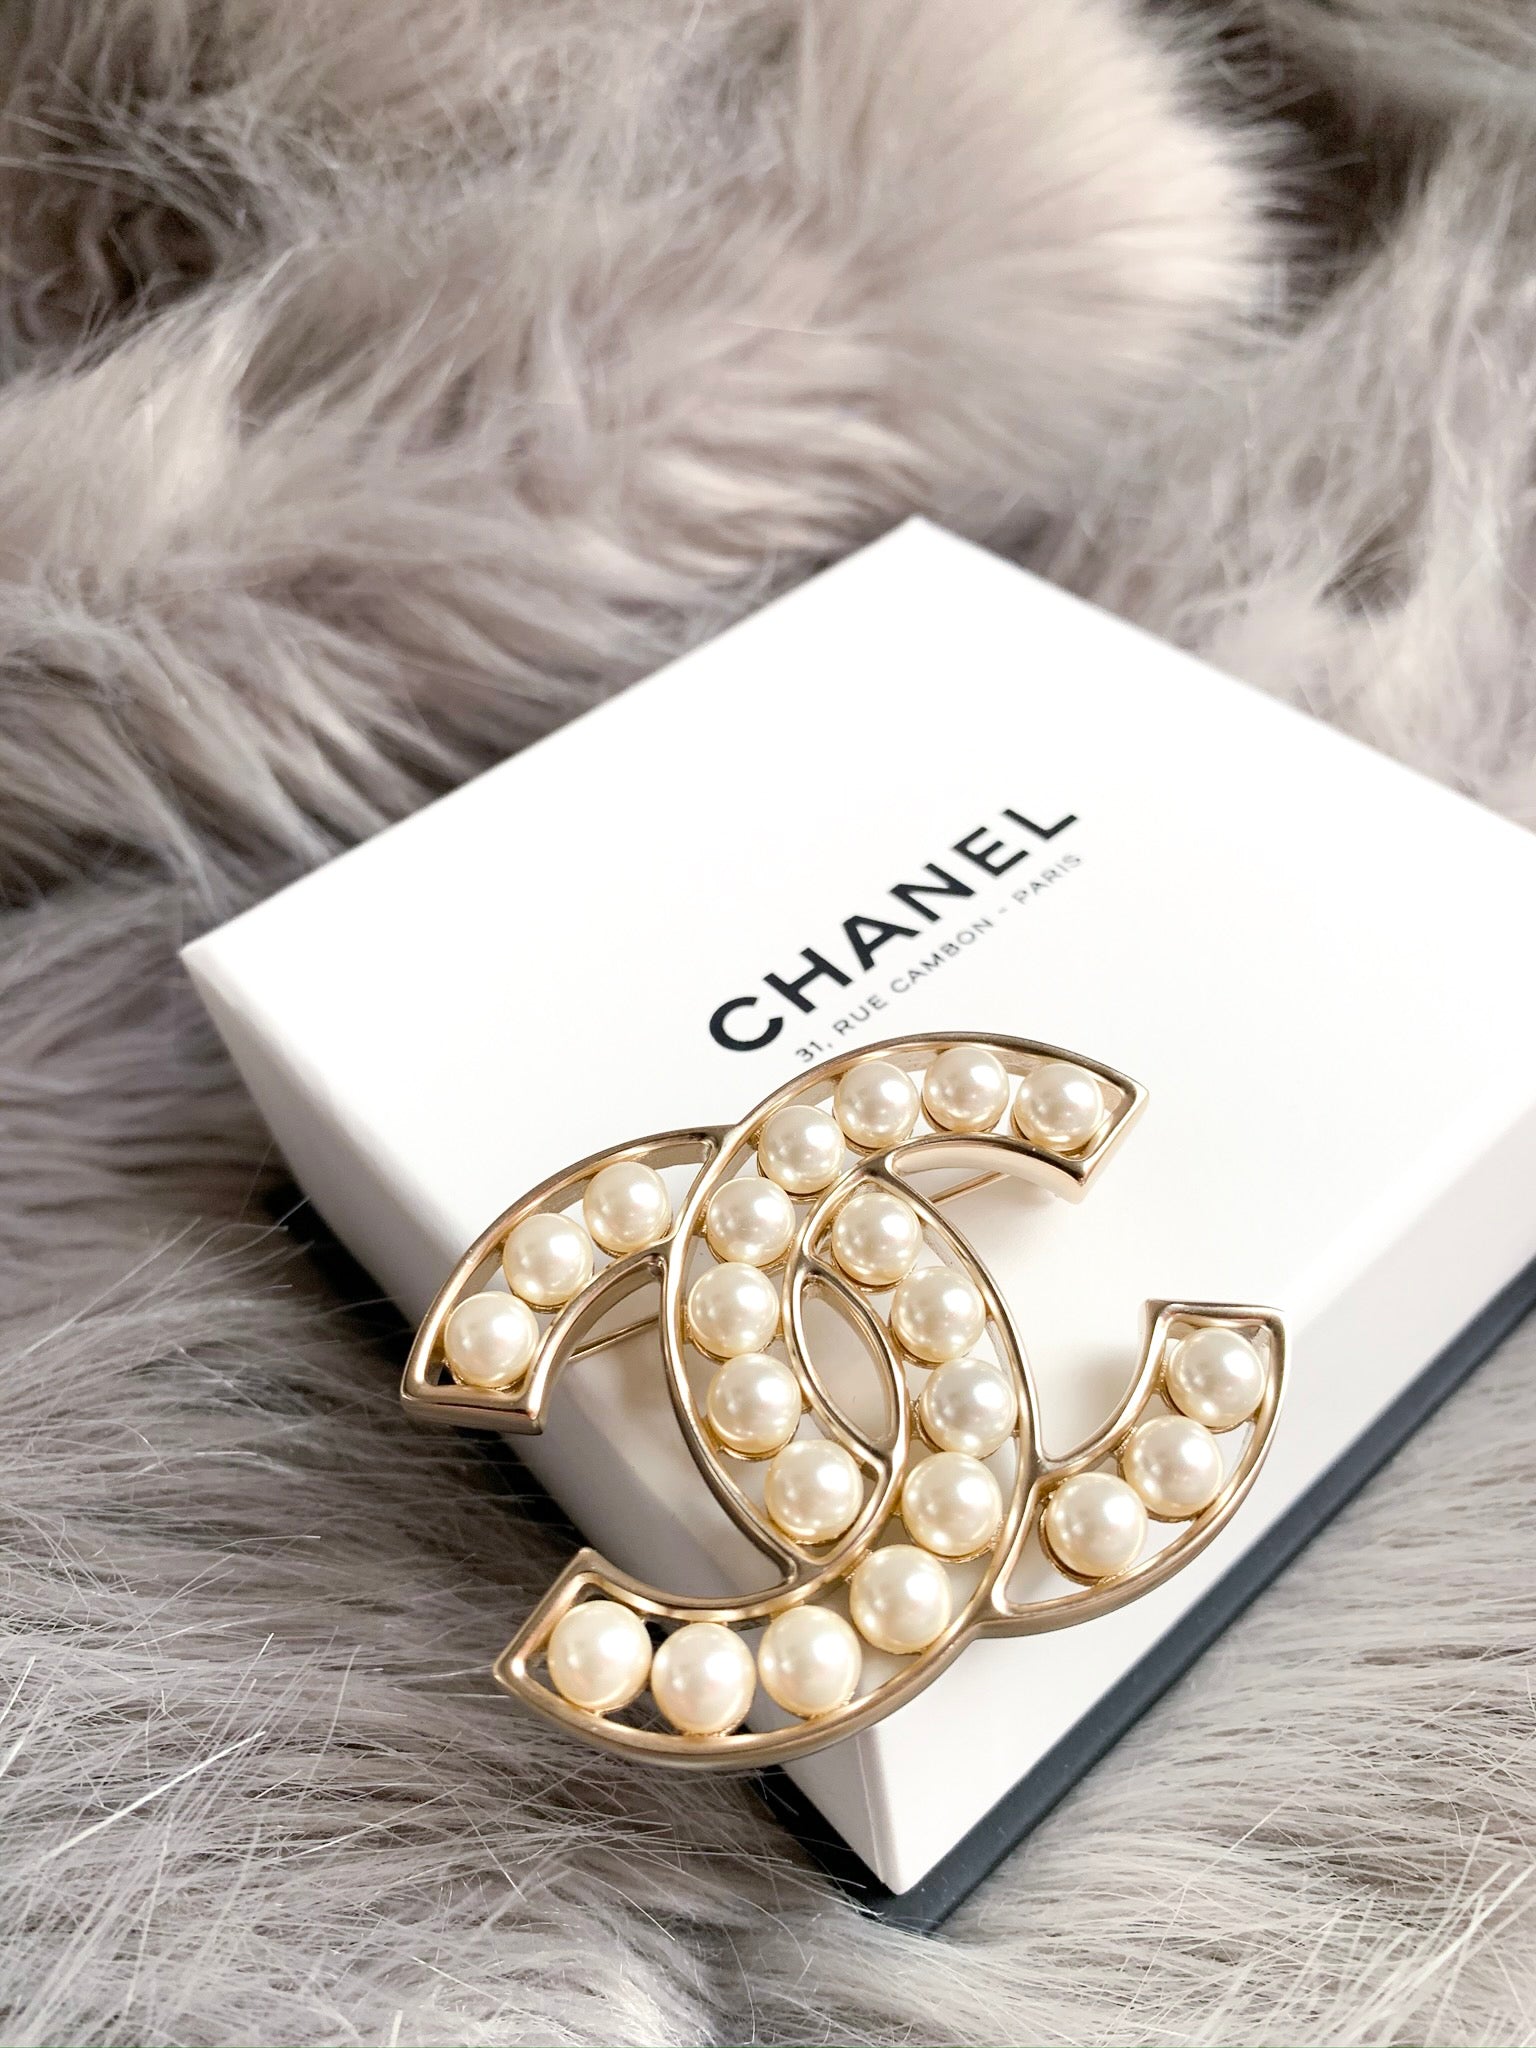 The Timeless Vision of Coco Chanel Simplicity is the Essence of True  DSF  Antique Jewelry